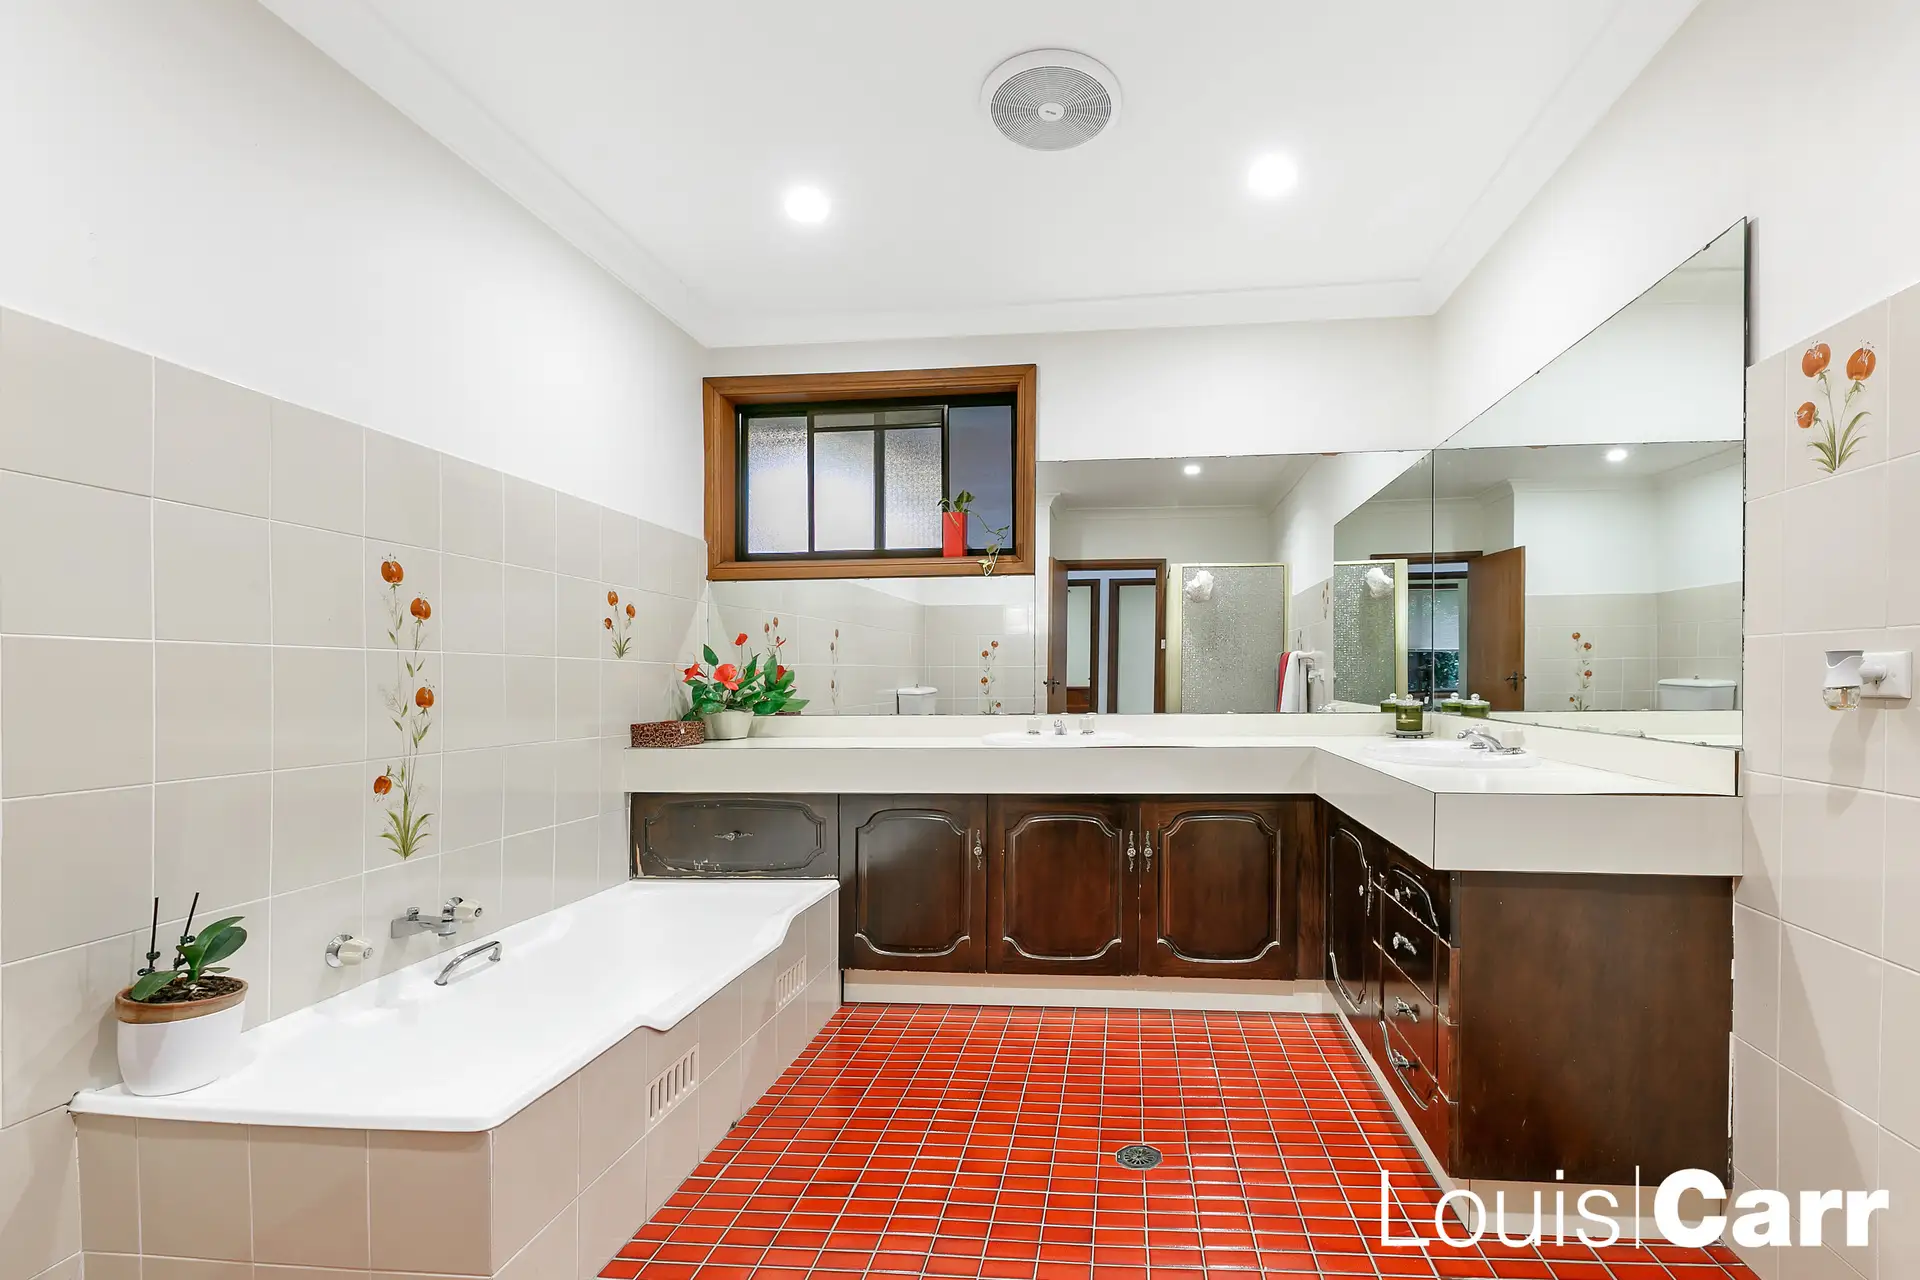 Photo #7: 9 Andrew Place, North Rocks - Sold by Louis Carr Real Estate